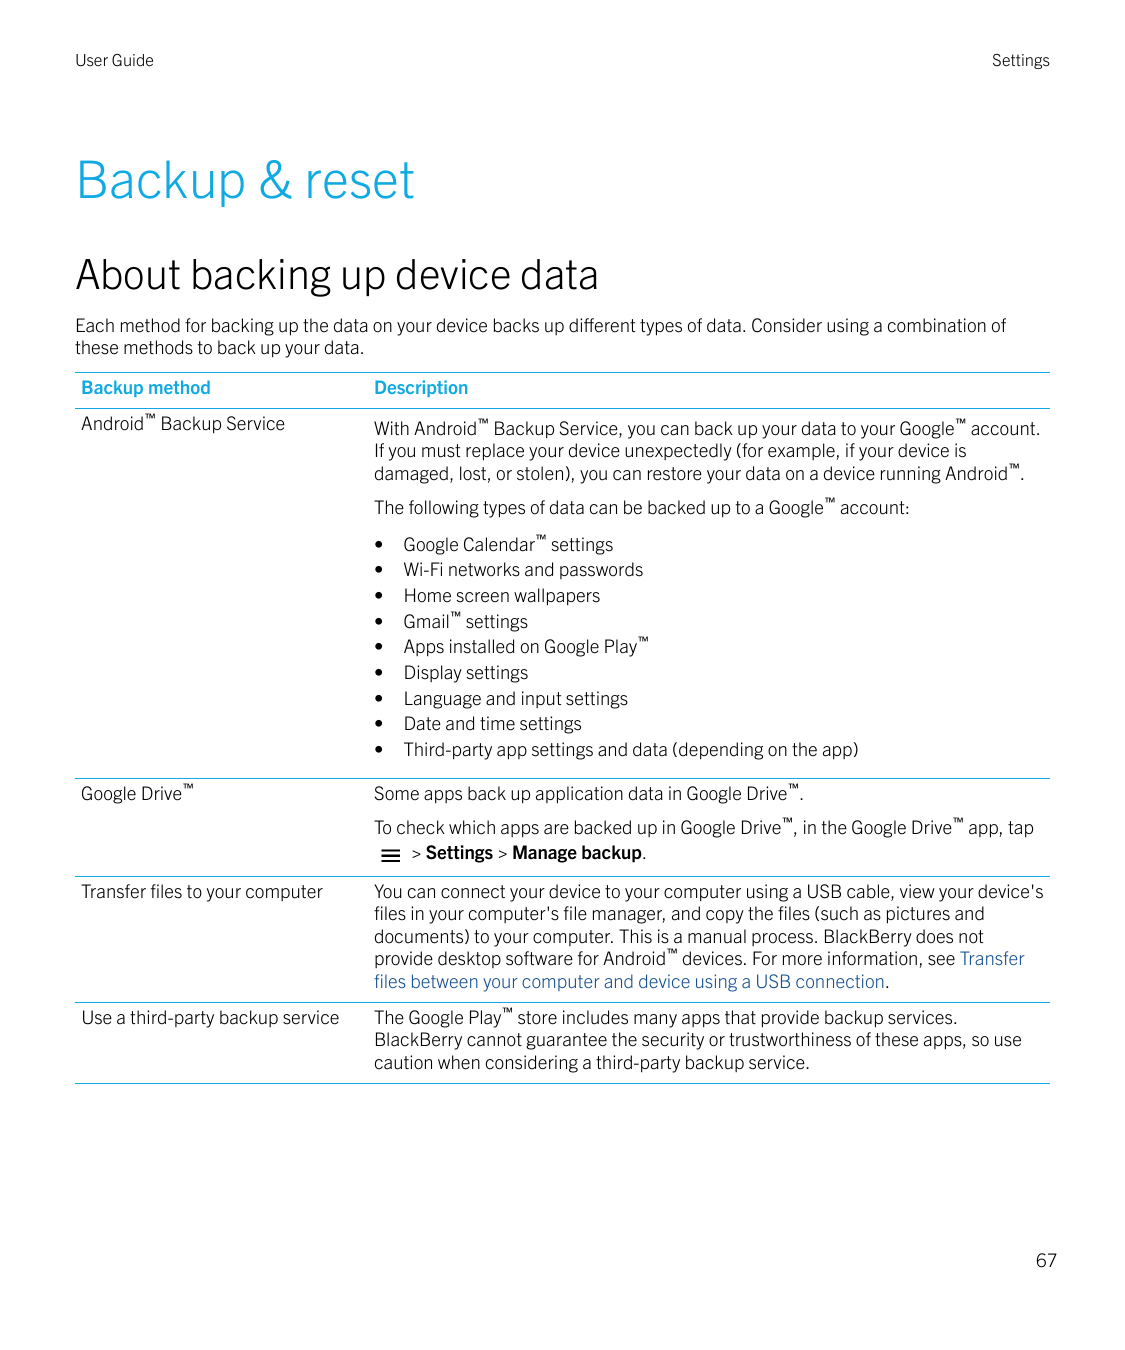 User GuideSettingsBackup & resetAbout backing up device dataEach method for backing up the data on your device backs up differen